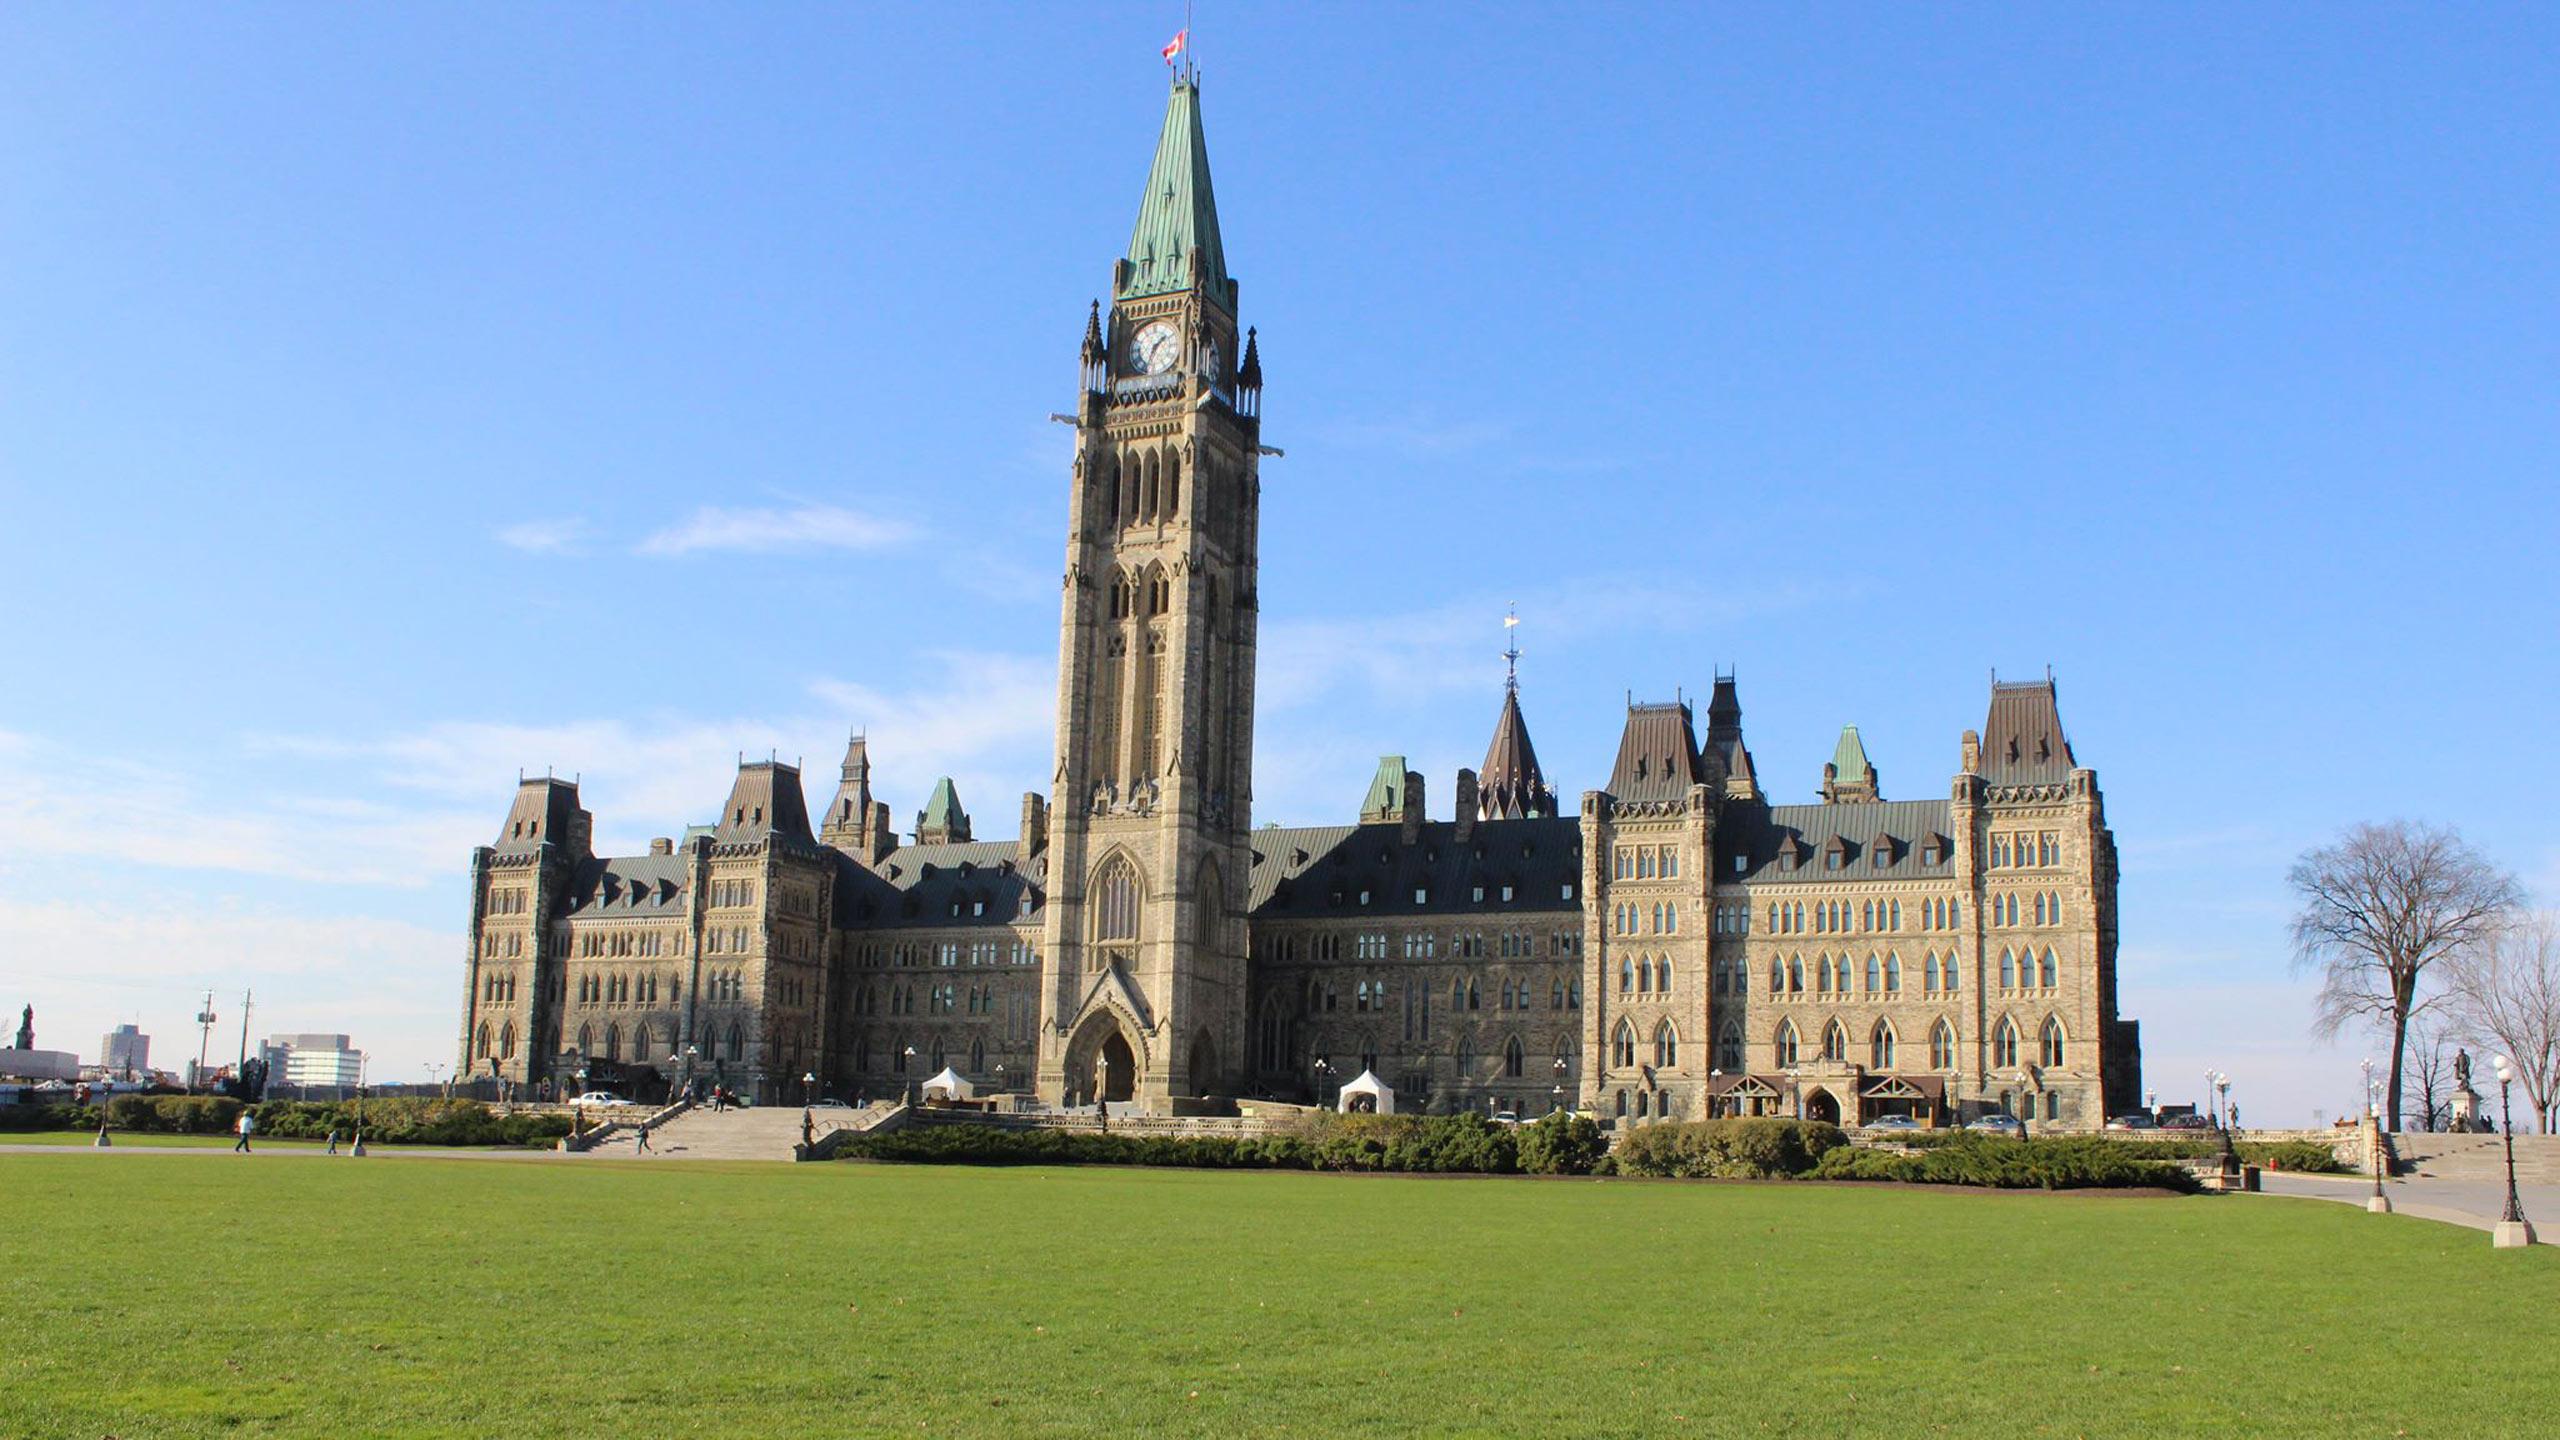 The Daughters of the Vote Conference will take place on Parliament Hill on March 8. PHOTO Izabella Balcerzak